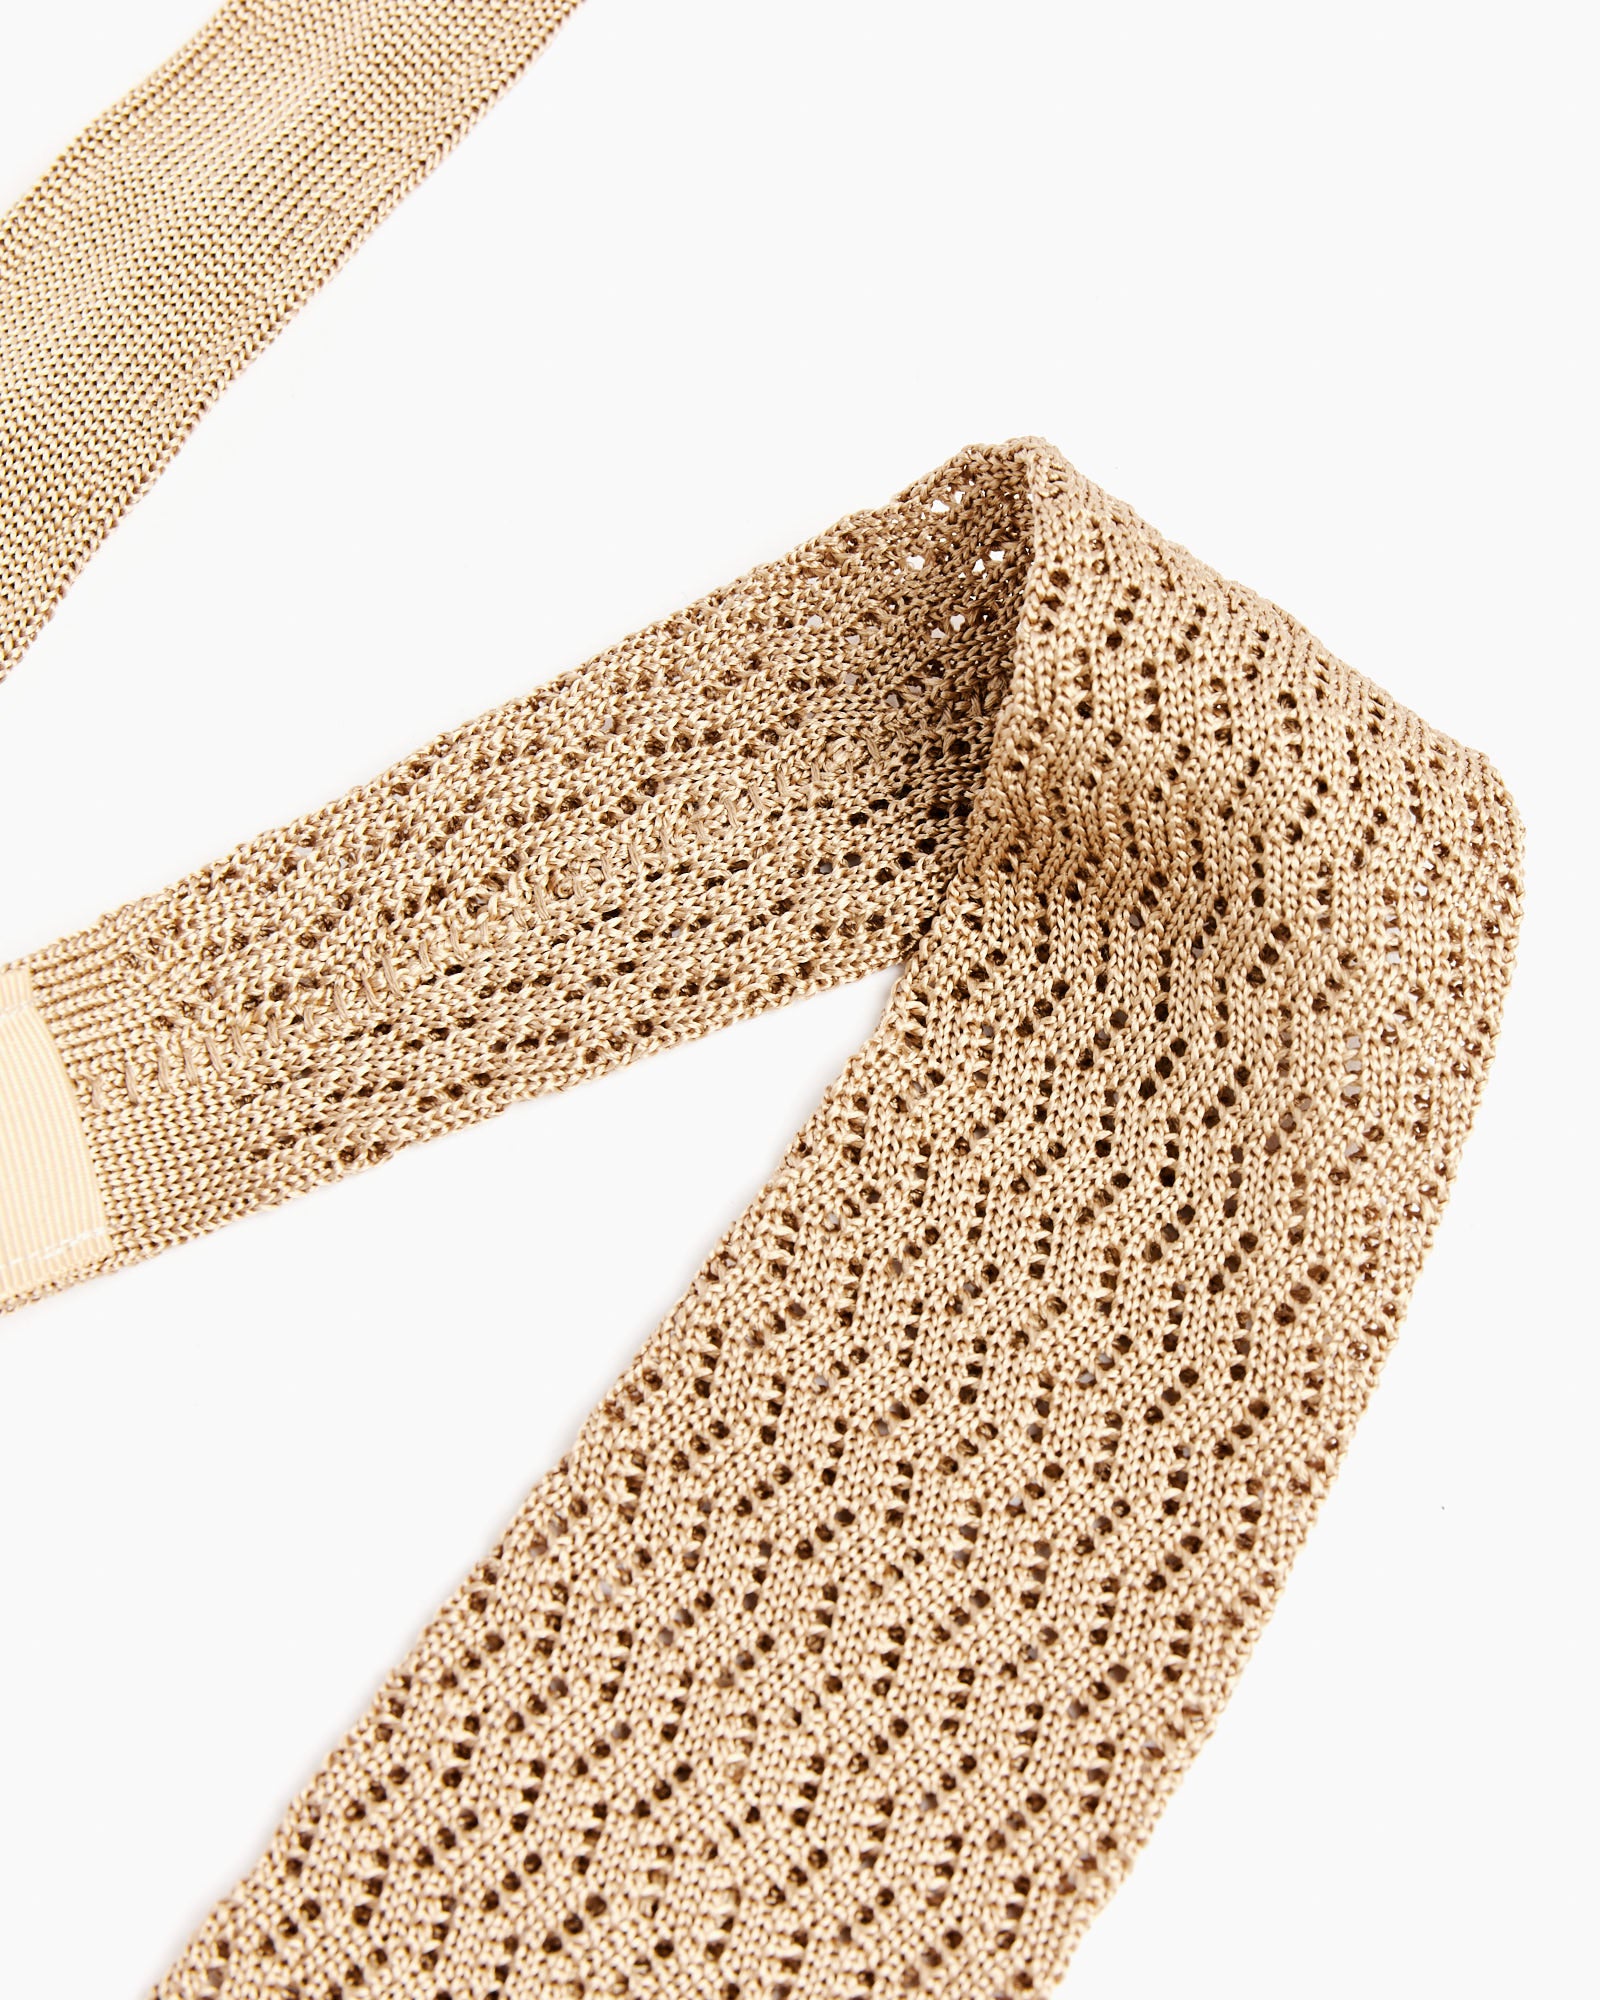 Crochet Tie in Taupe